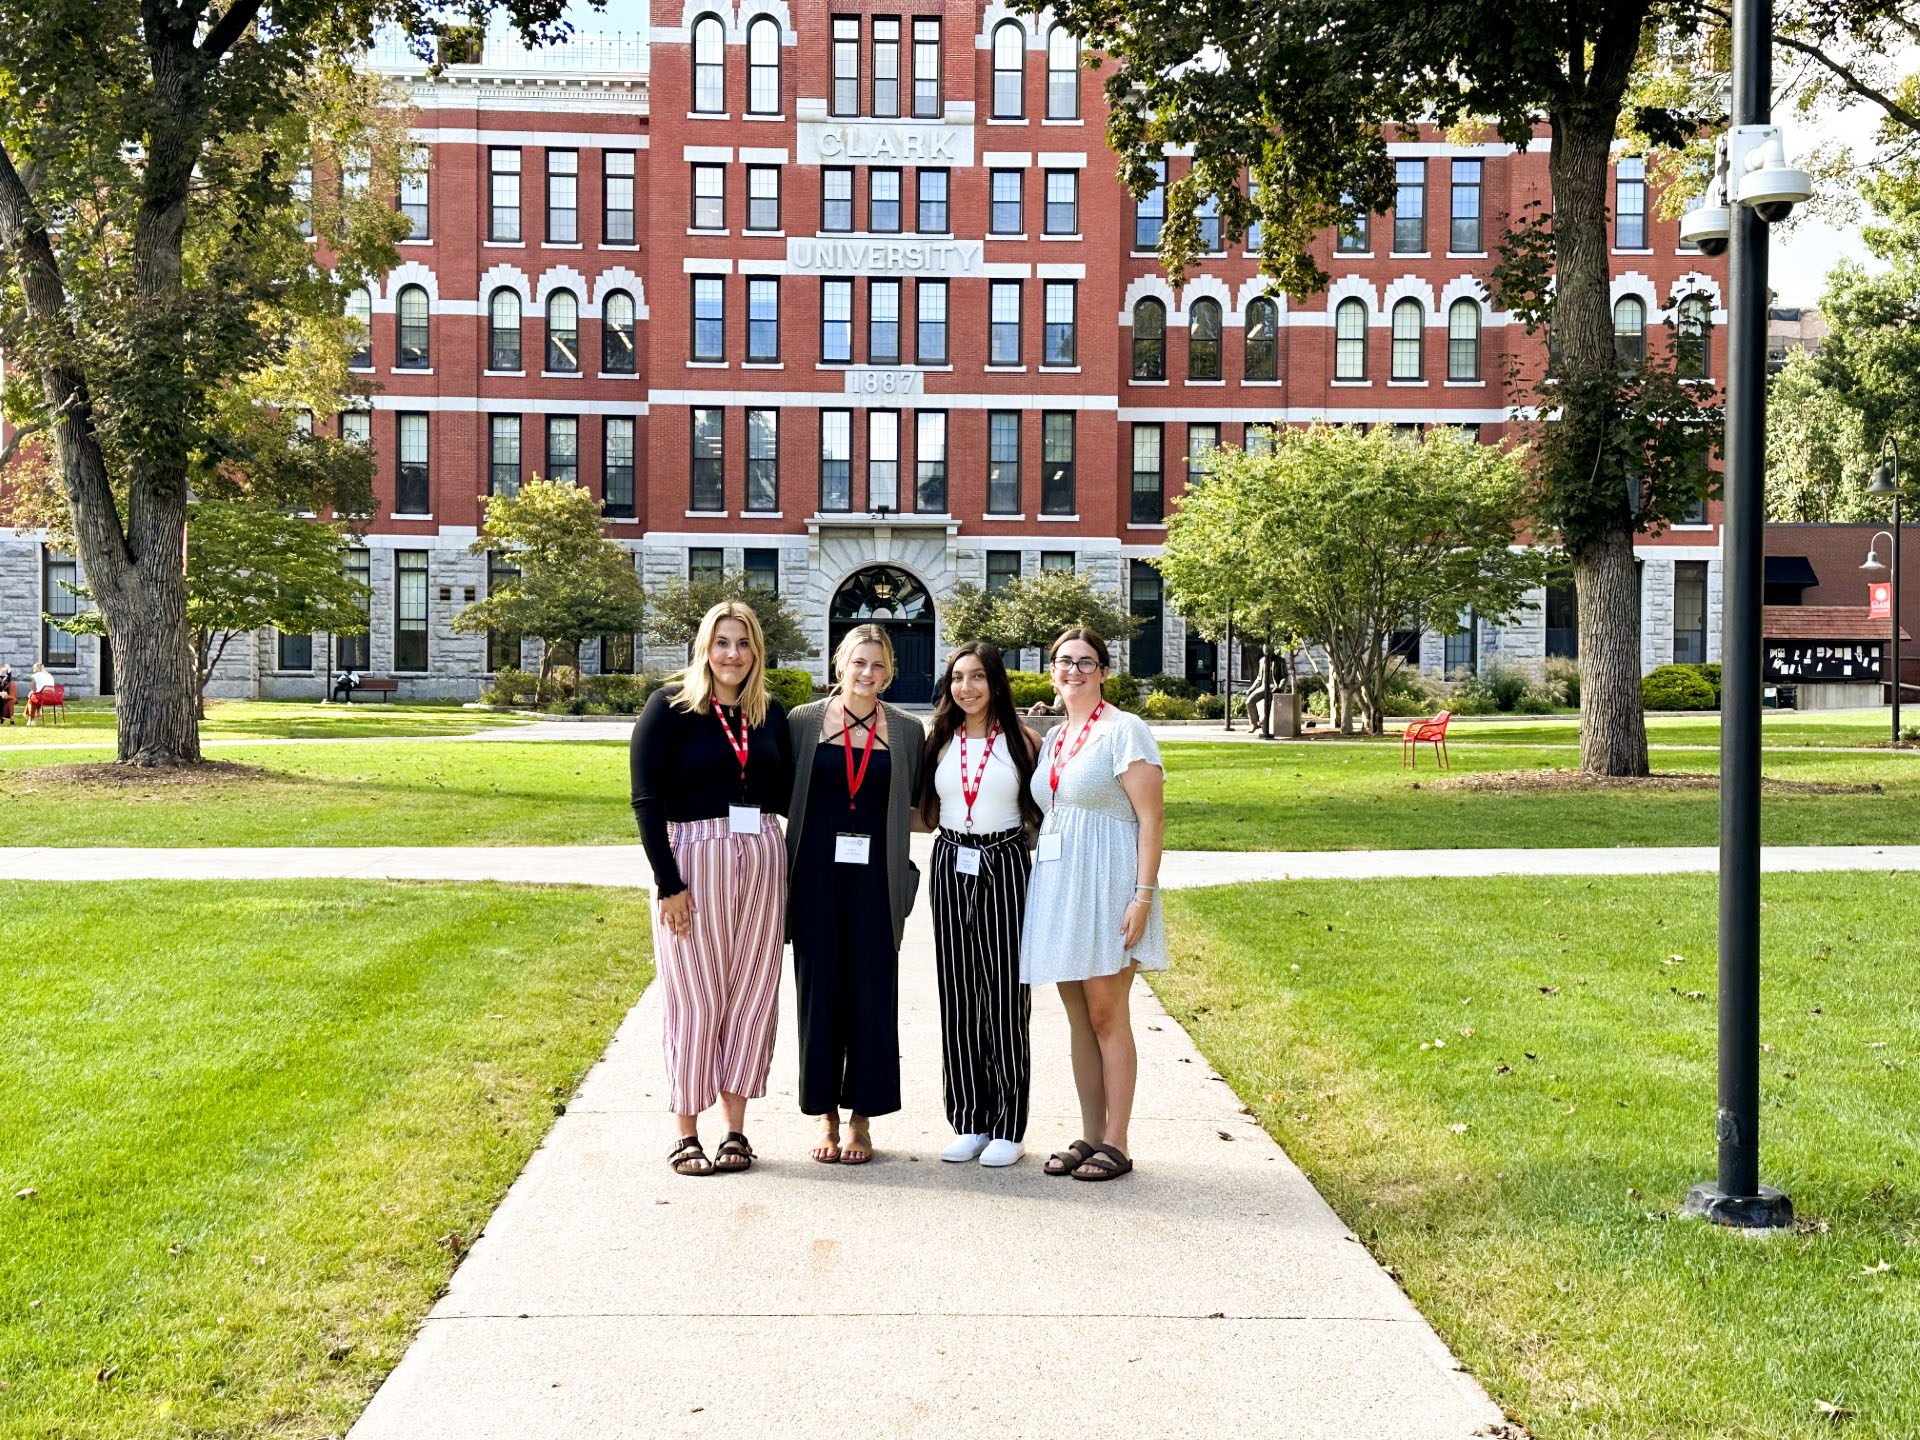 Four young women stand in front of a building that reads "Clark University" 